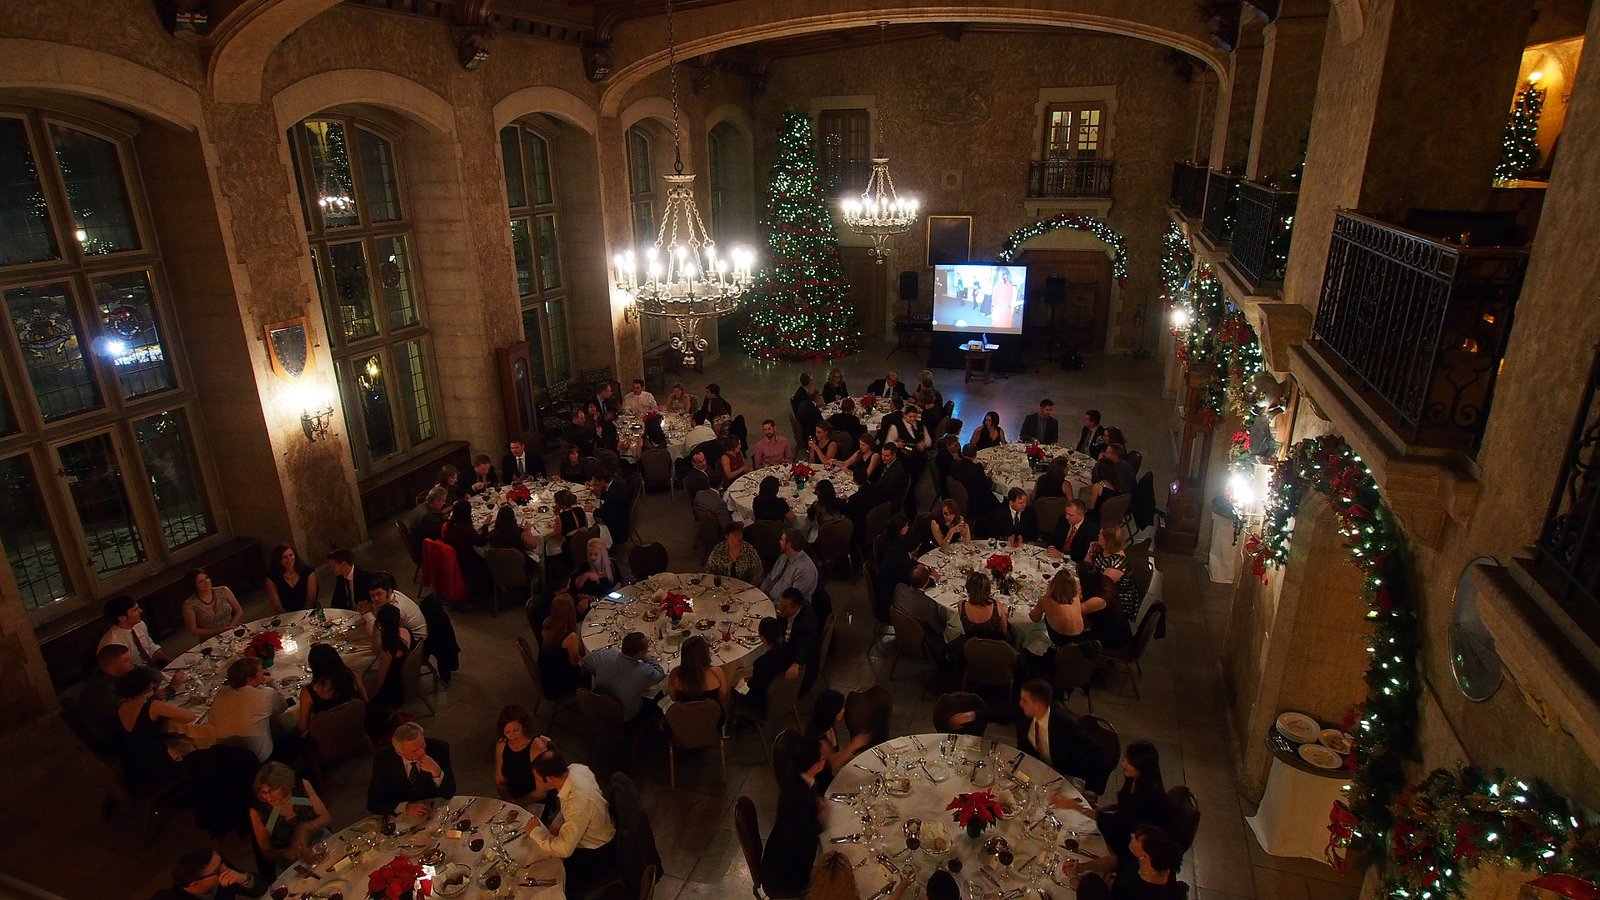 The people behind this Christmas party at the Banff Springs Hotel in Canada know how to organise a party as if money were no object, and so can you ... photo by CC user wilsonhui on Flickr